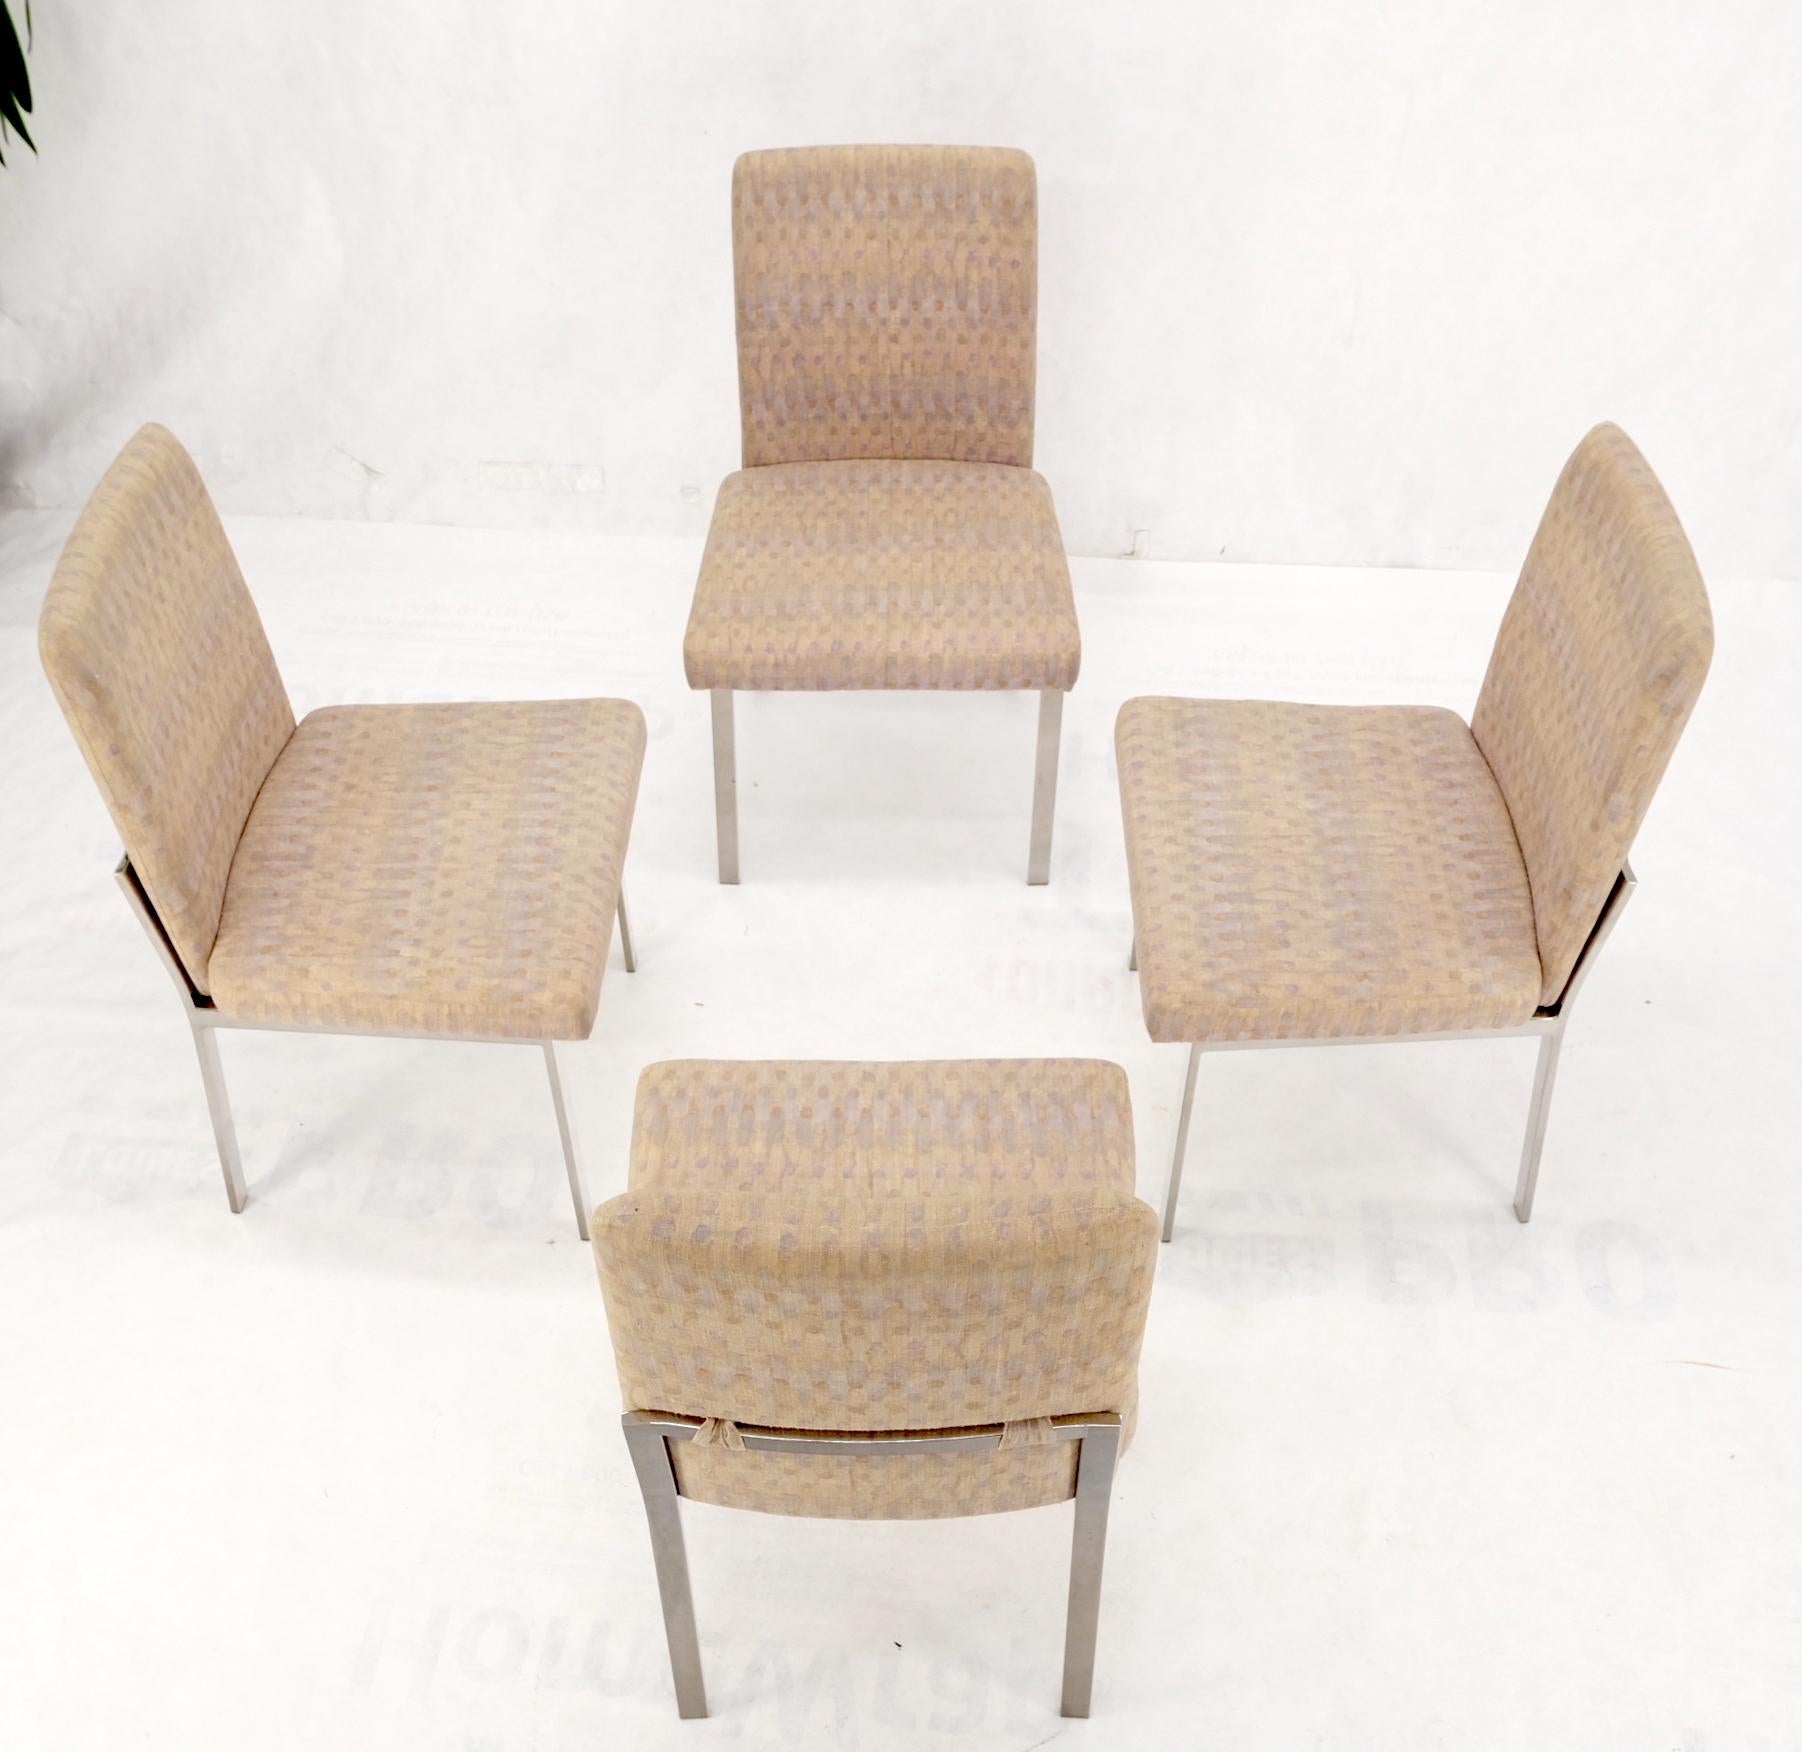 Set of 4 Mid-Century Modern Polished Stainless Steel Upholstered Dining Chairs For Sale 3